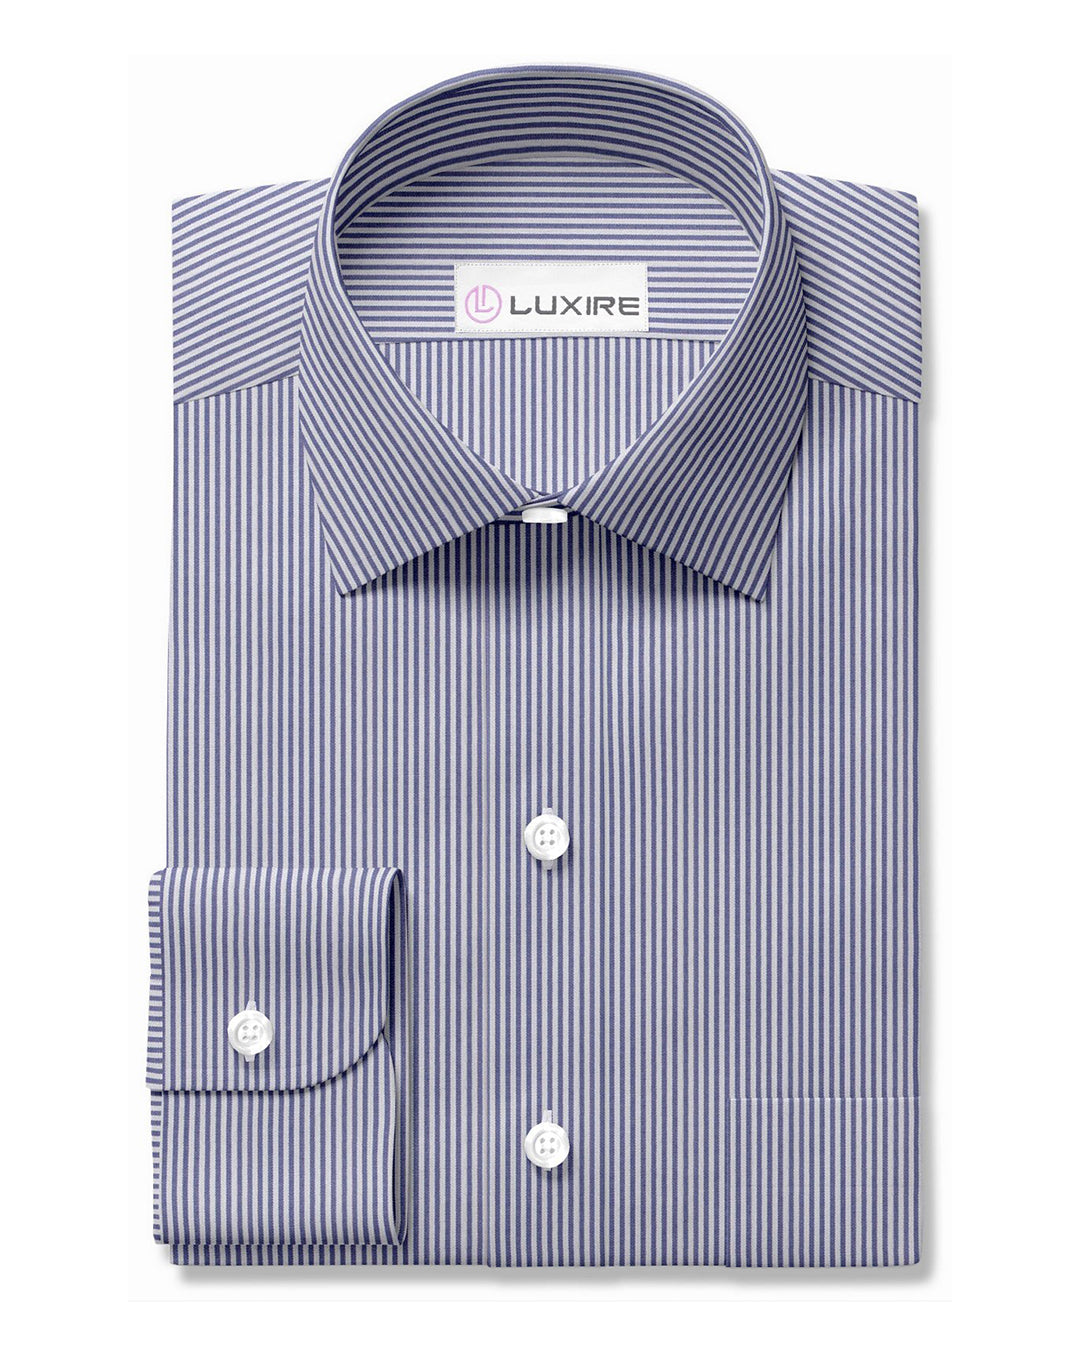 Business-Shirt White With Blue Dress Stripes